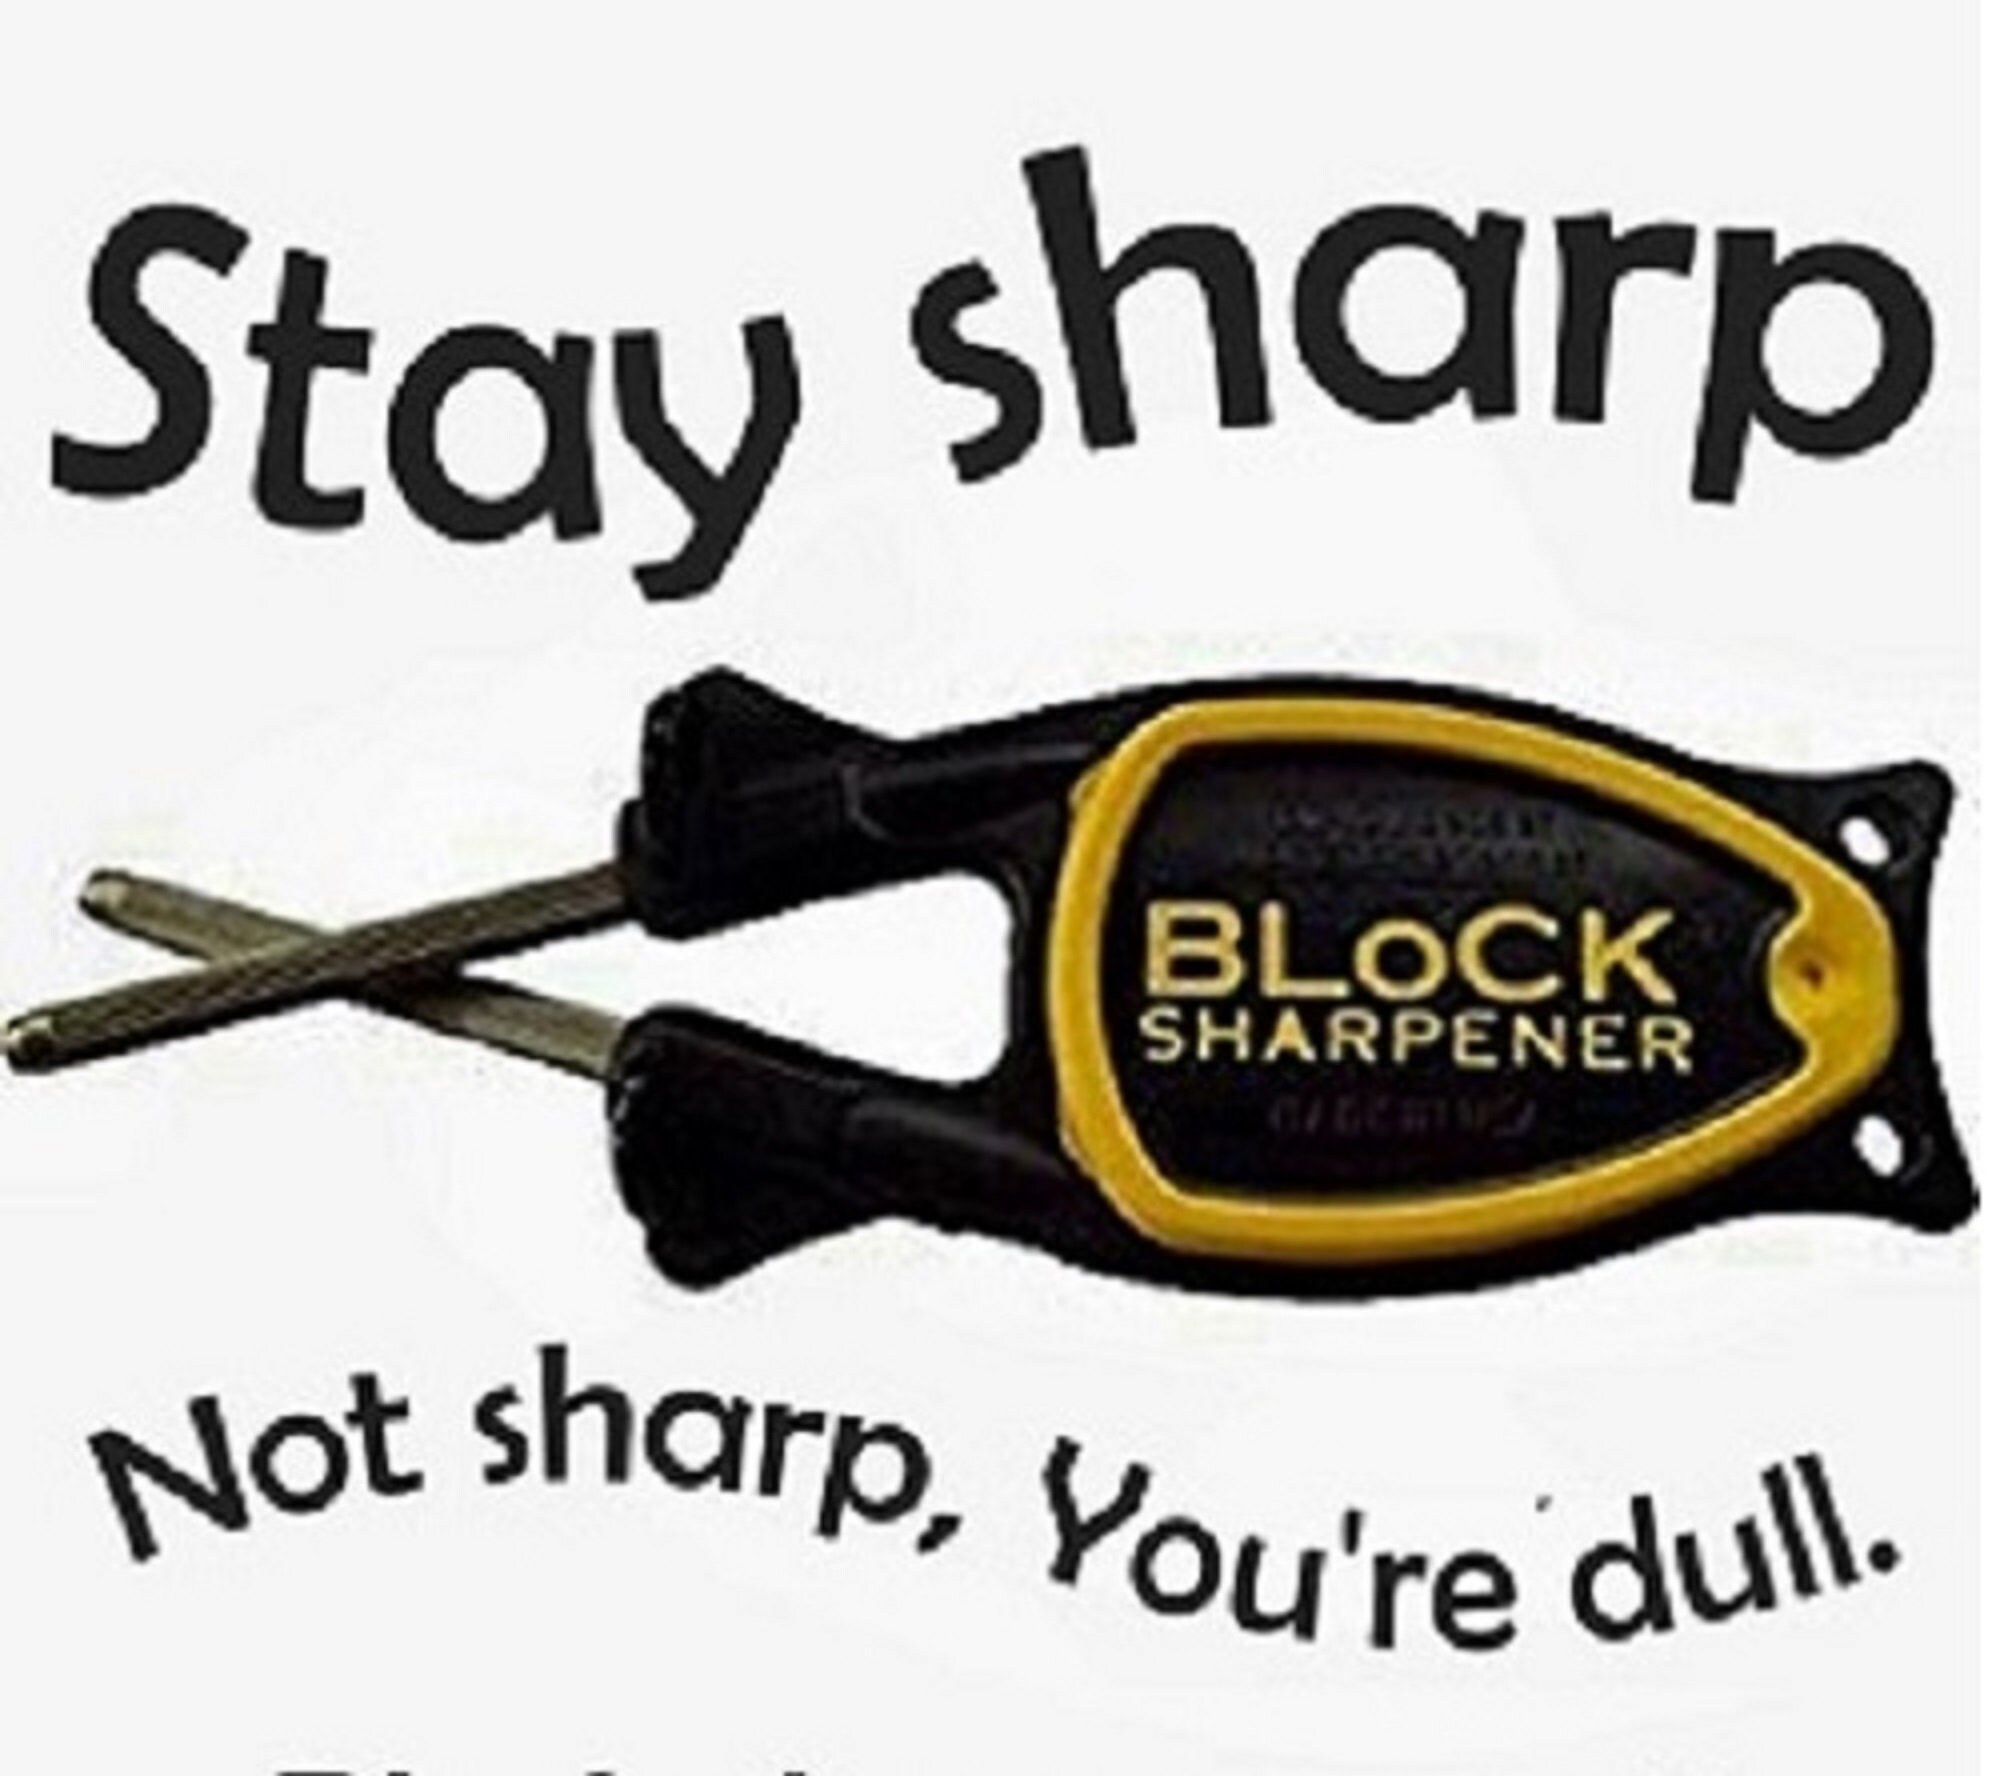 Block Knife Sharpener are Patent sharpener made to reline and hone